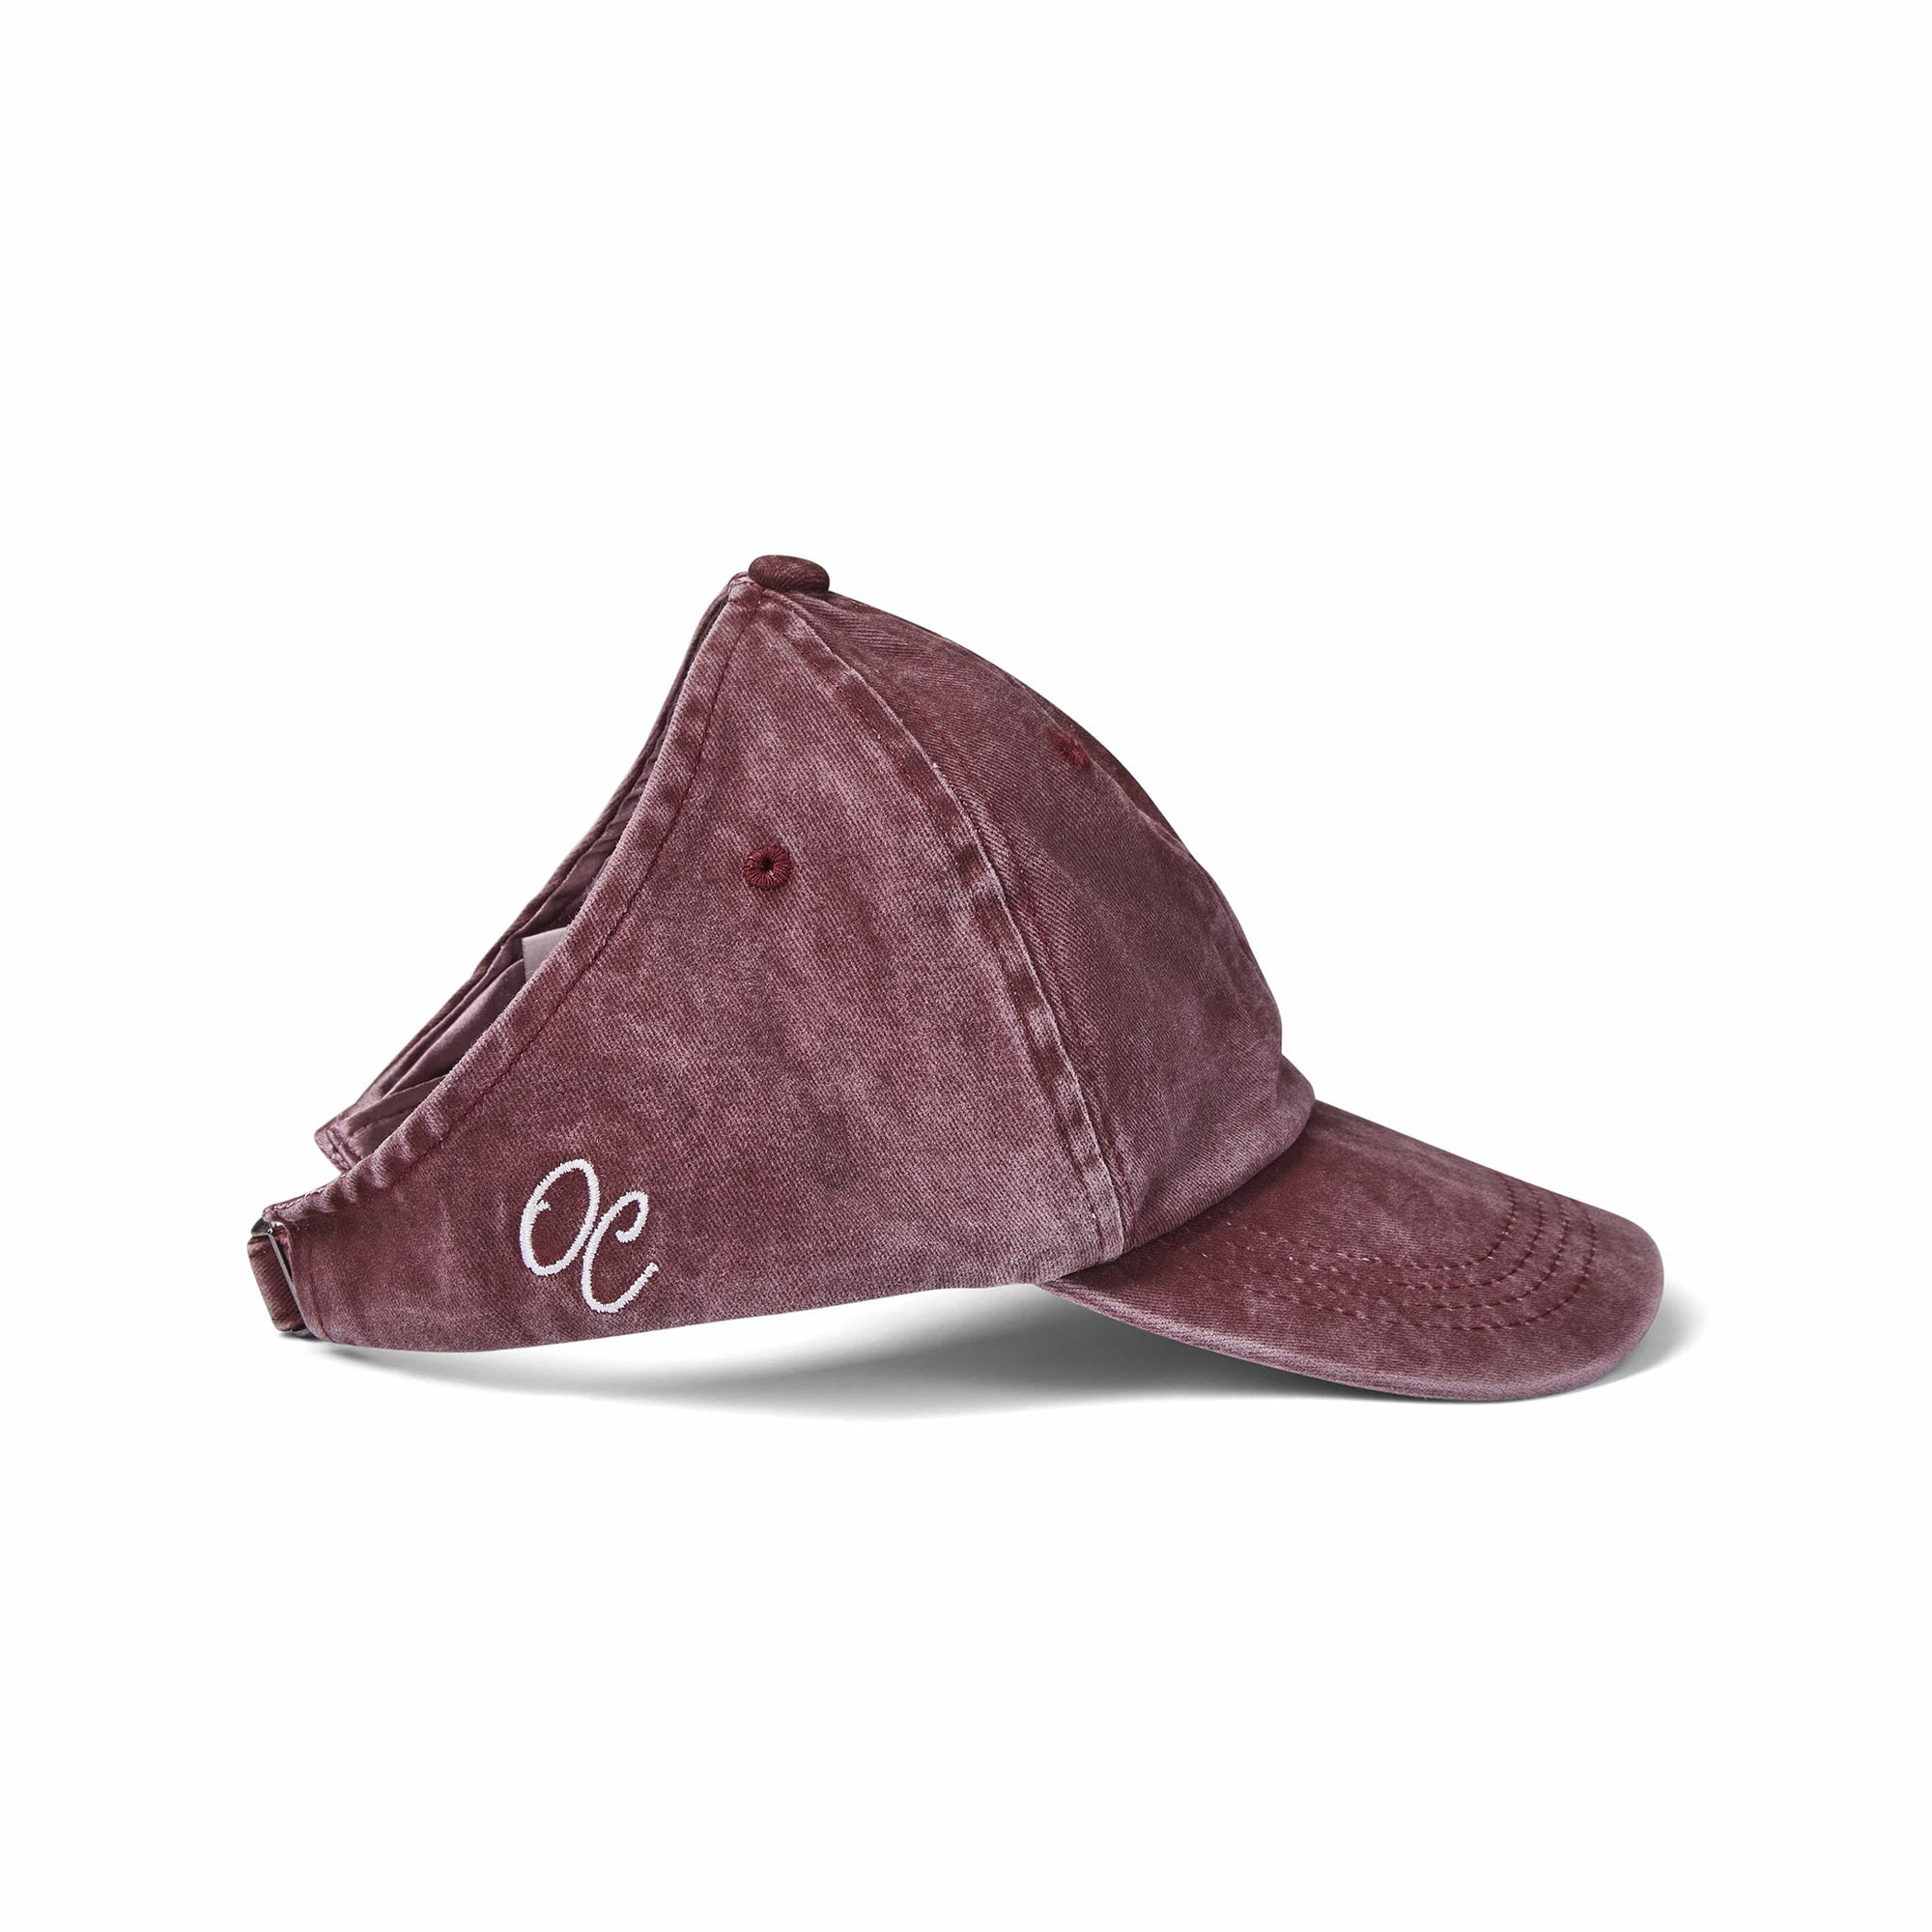 Only Curls Satin Lined Baseball Hat (with open back) - Washed Burgundy - Only Curls